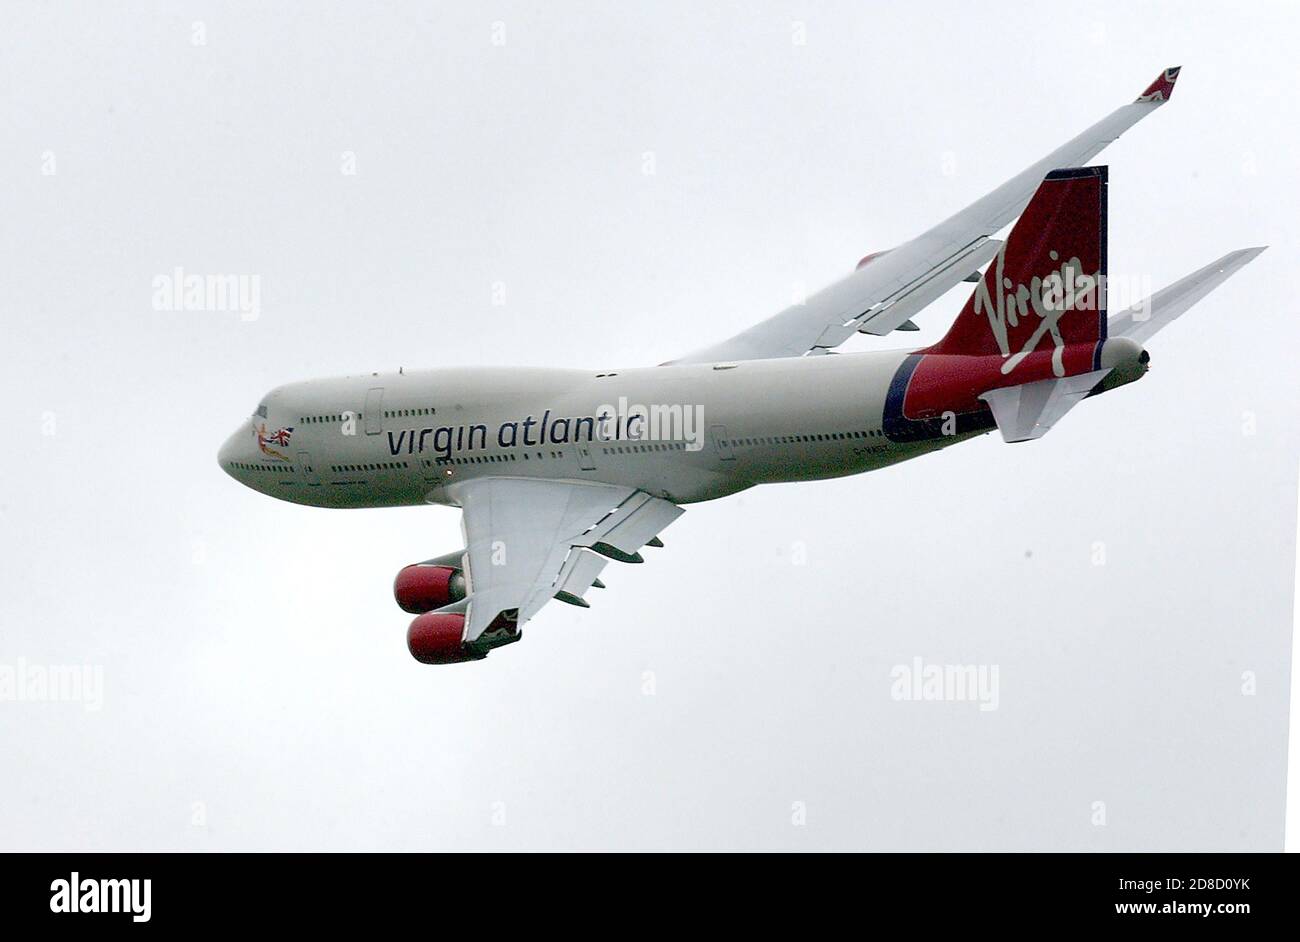 A Virgin Atlantic Boeing 747 (G-VAST) makes a low flypast before Richard Branson recreates the 1853 flight of Sir George Cayley's glider, in a replica Stock Photo